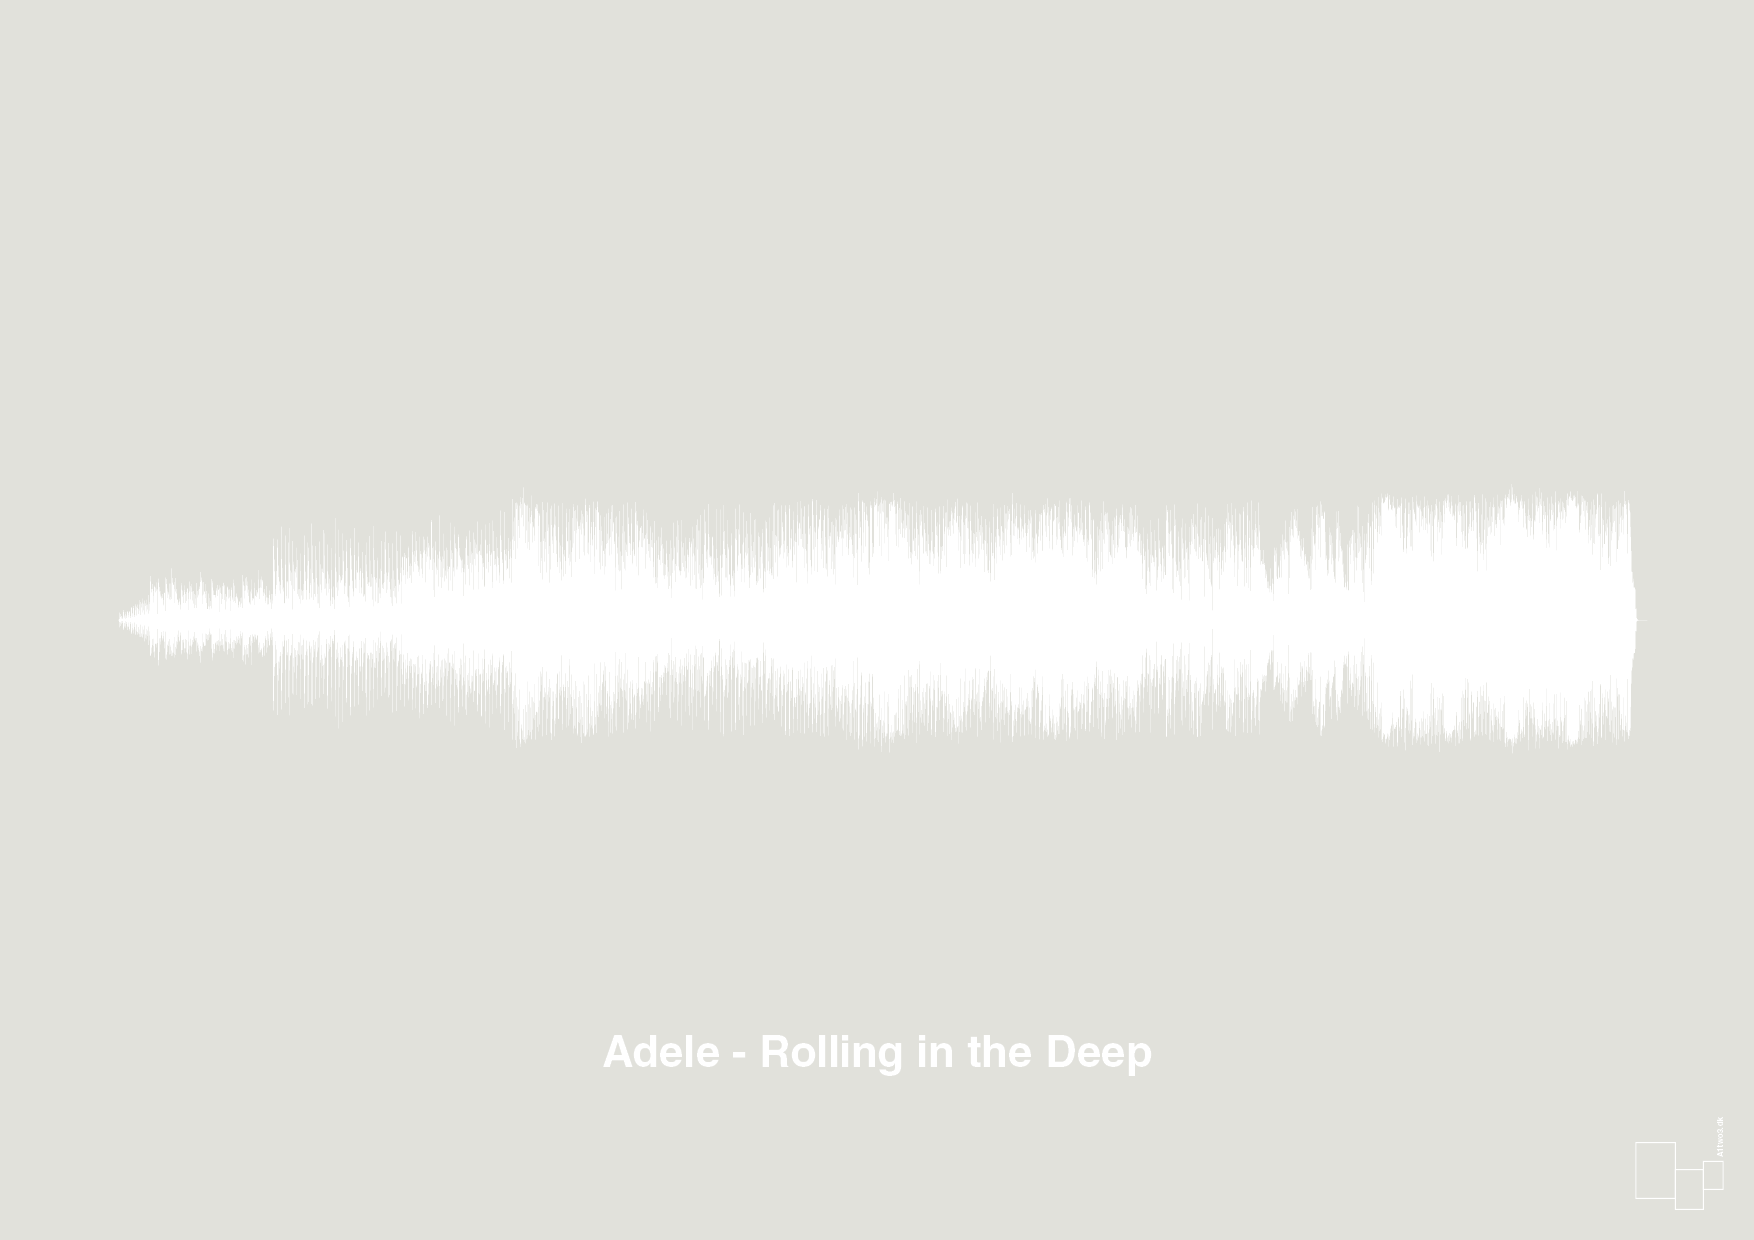 adele - rolling in the deep - Plakat med Musik i Painters White